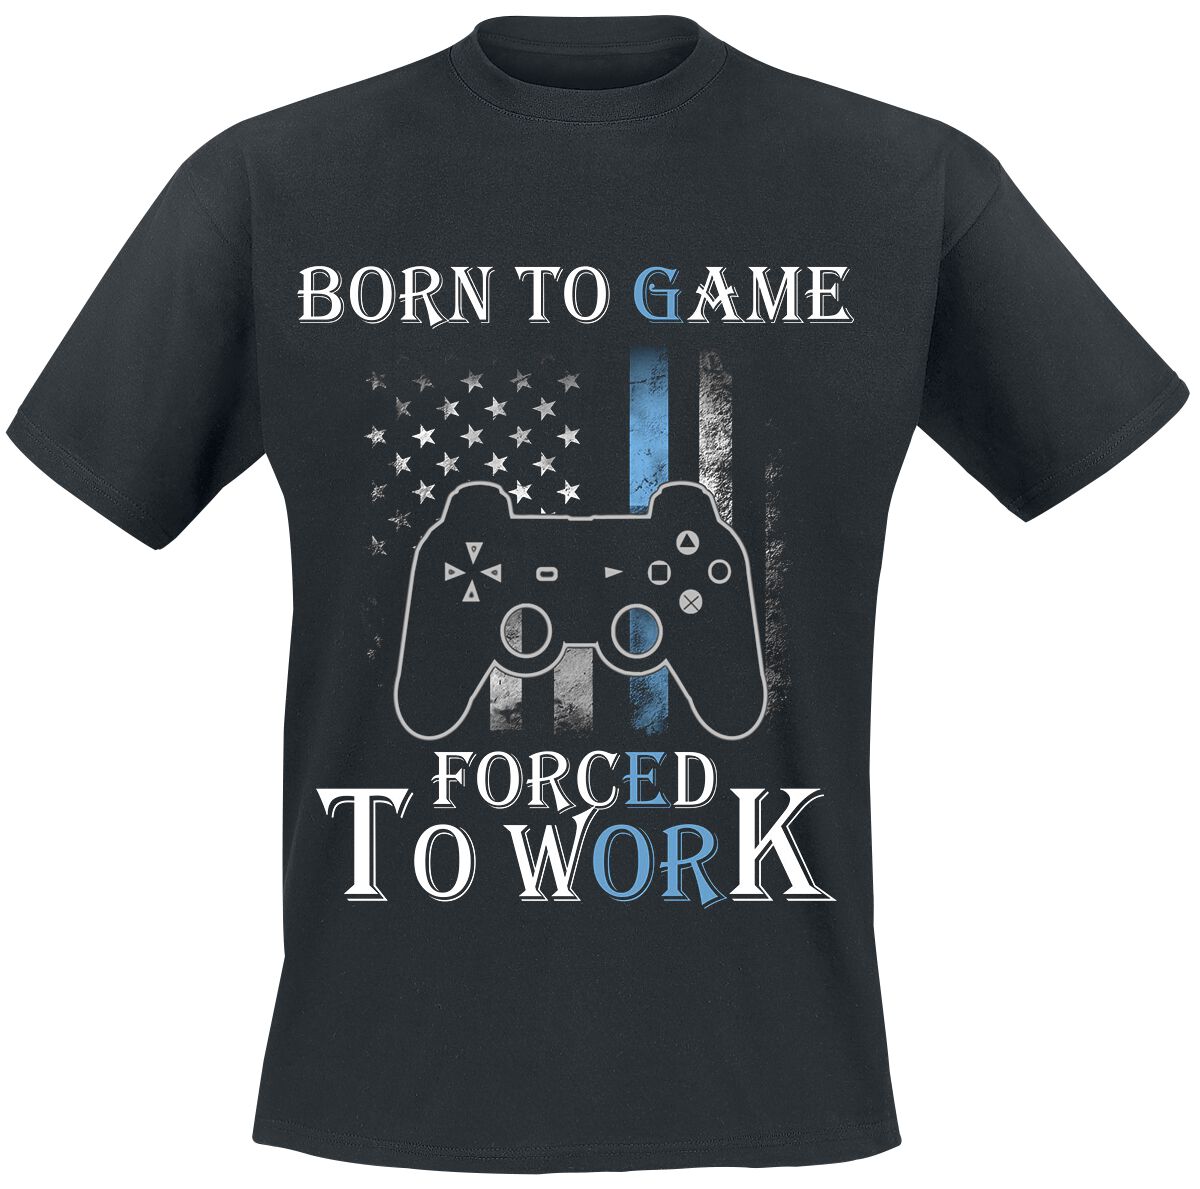 Born to game - Forced to work Born to game - Forced to work T-Shirt black